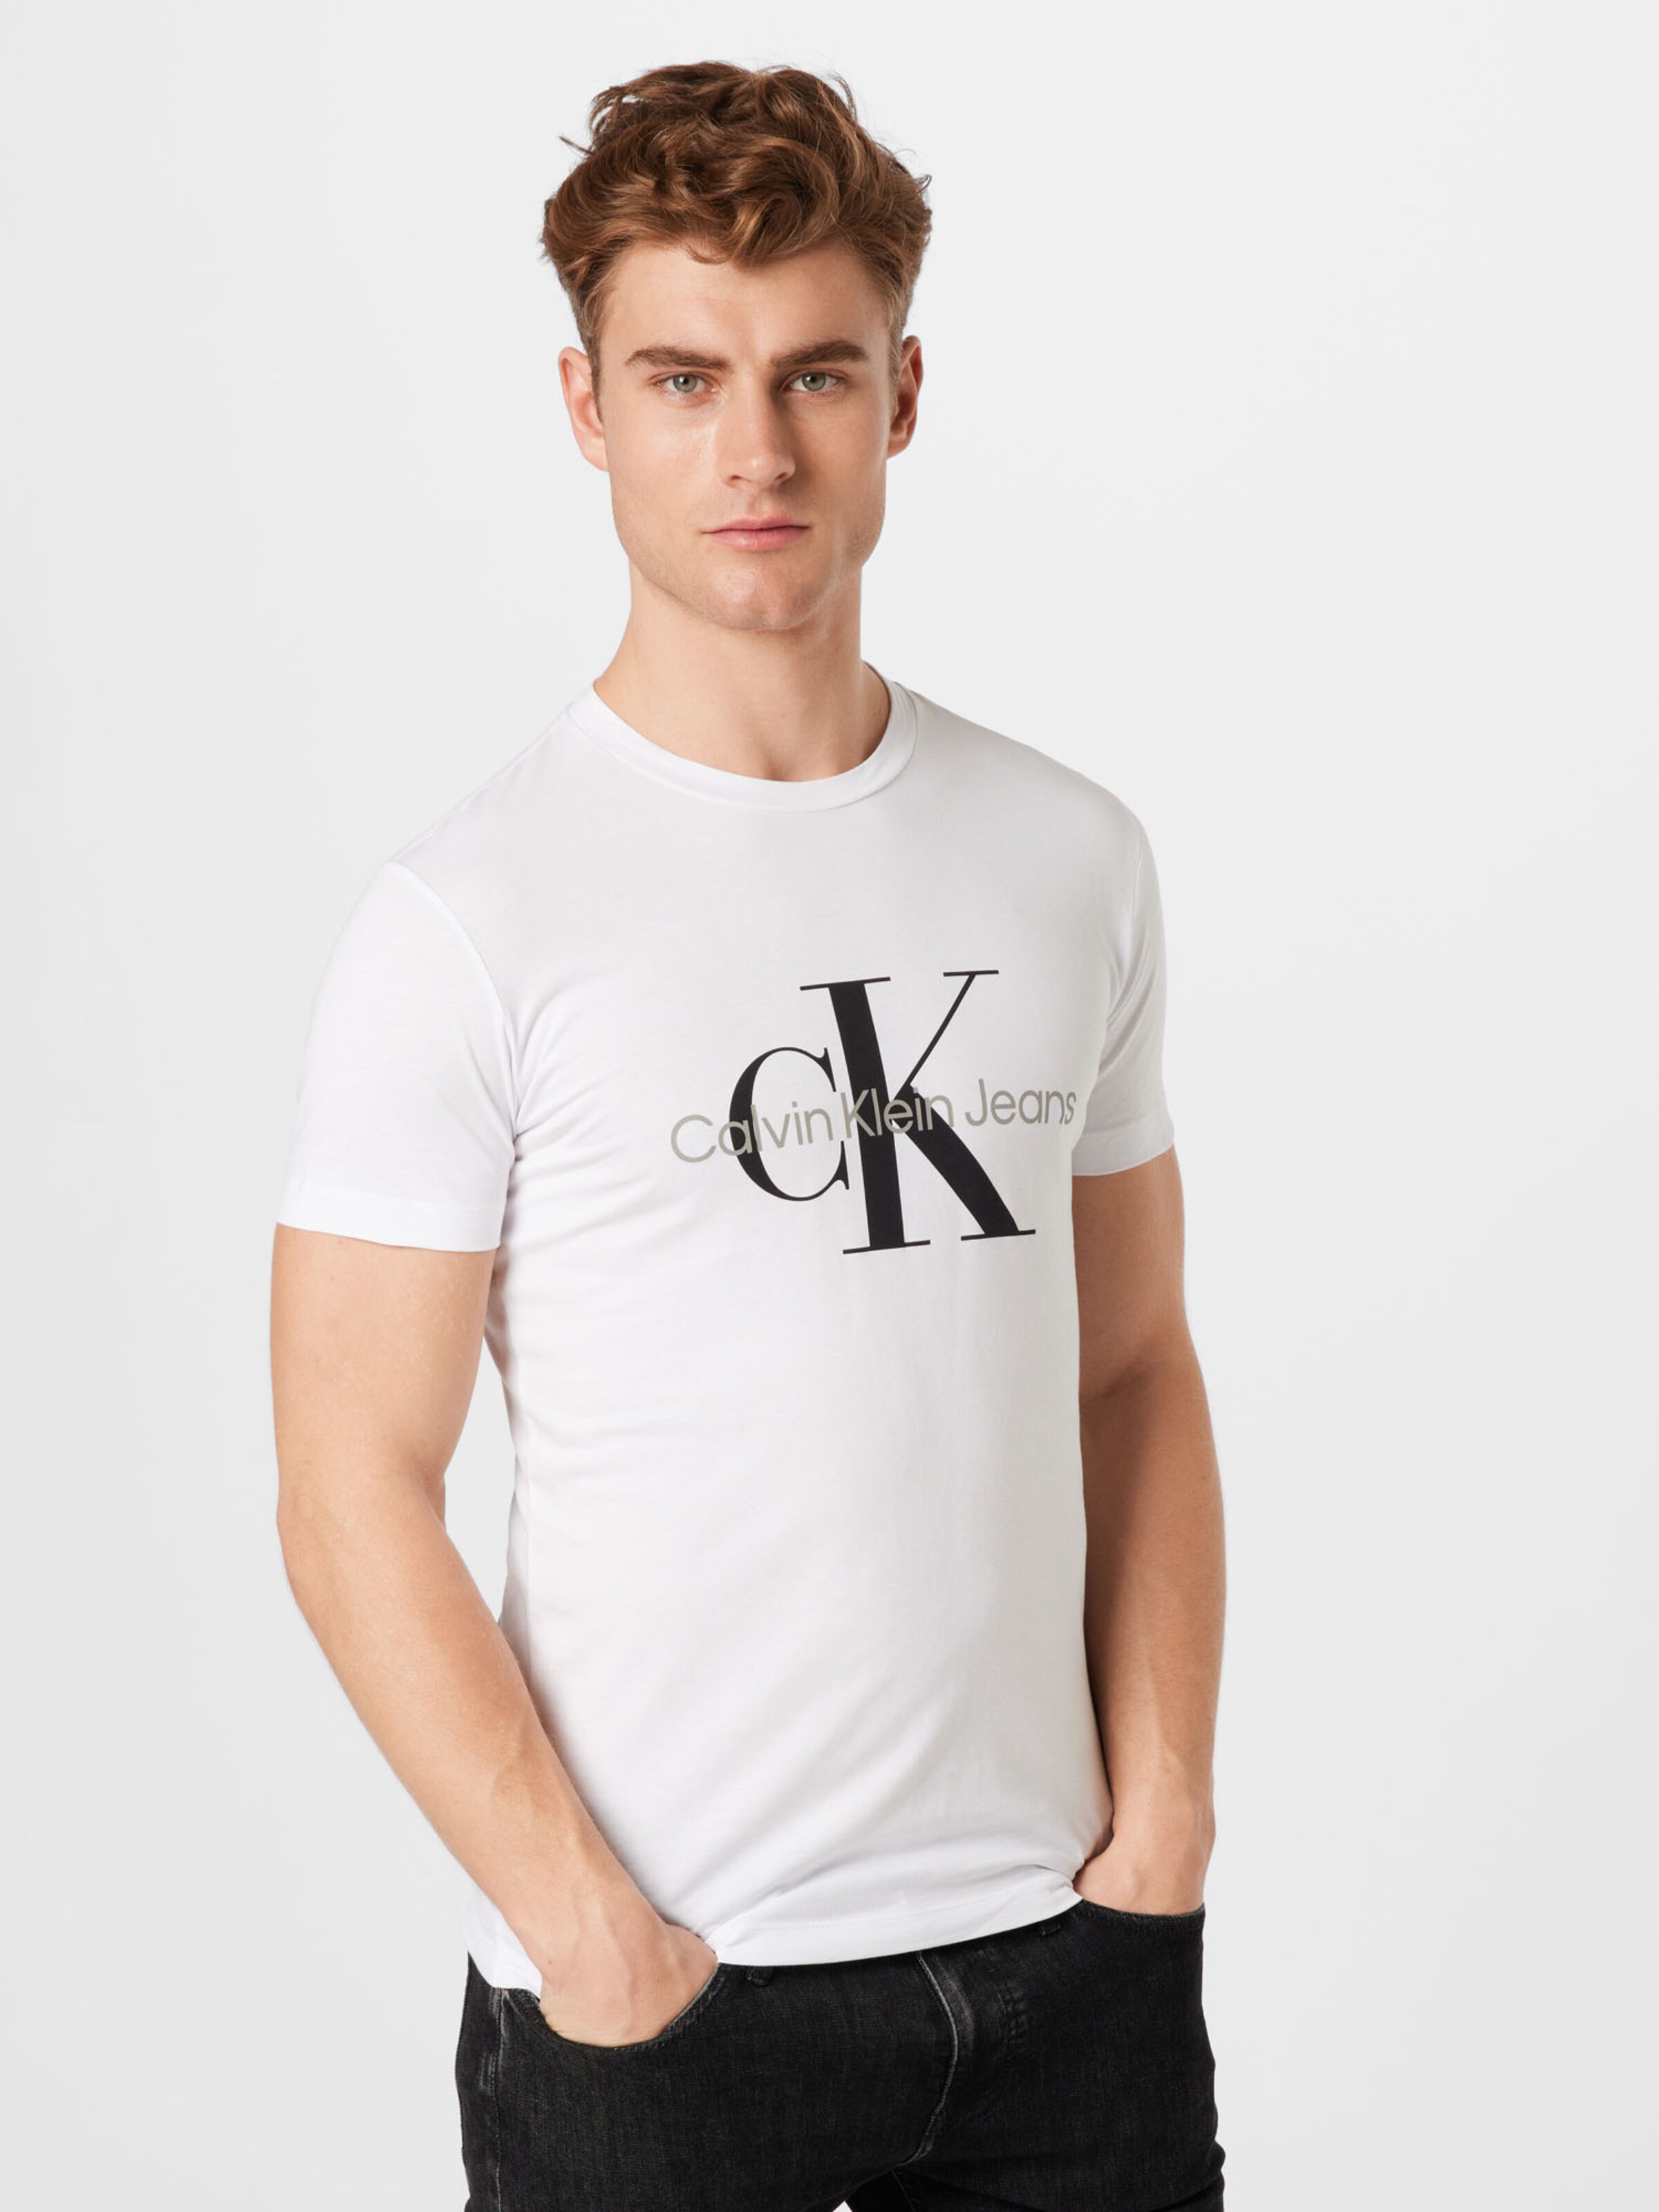 Calvin | in ABOUT YOU Weiß Jeans Klein T-Shirt